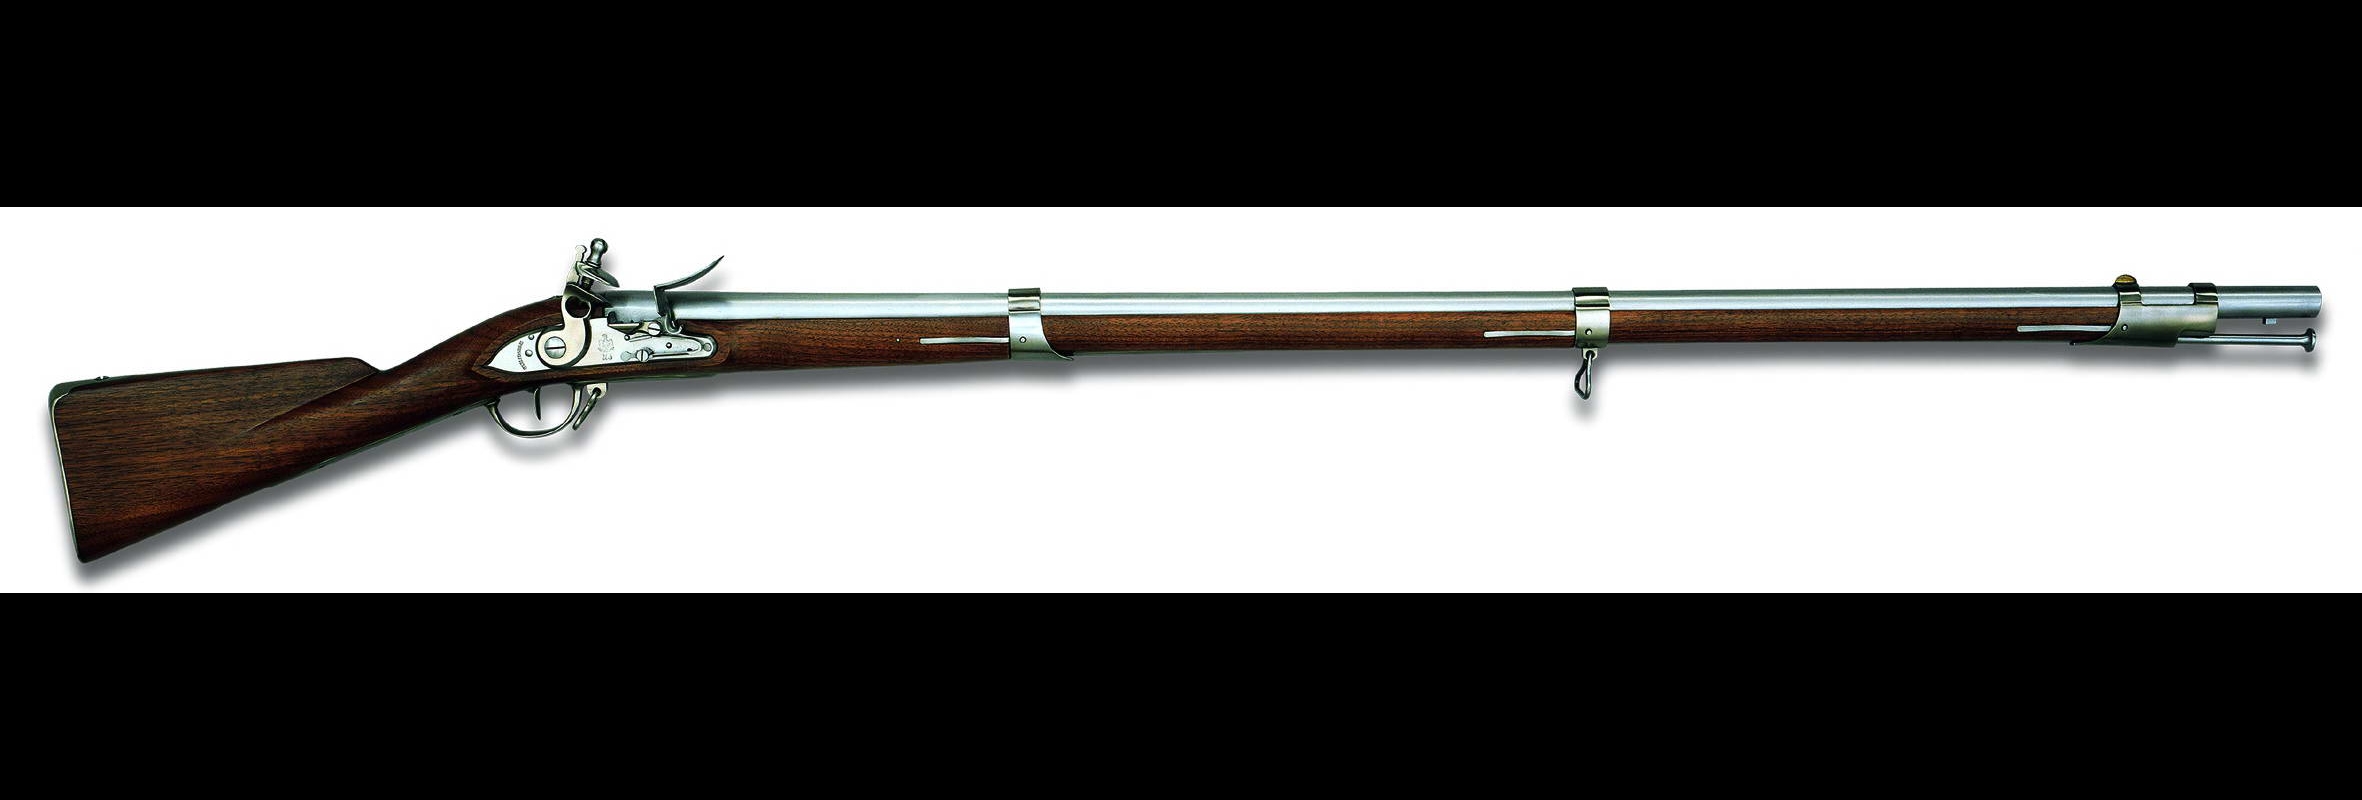 Weapons Musket 2362x800